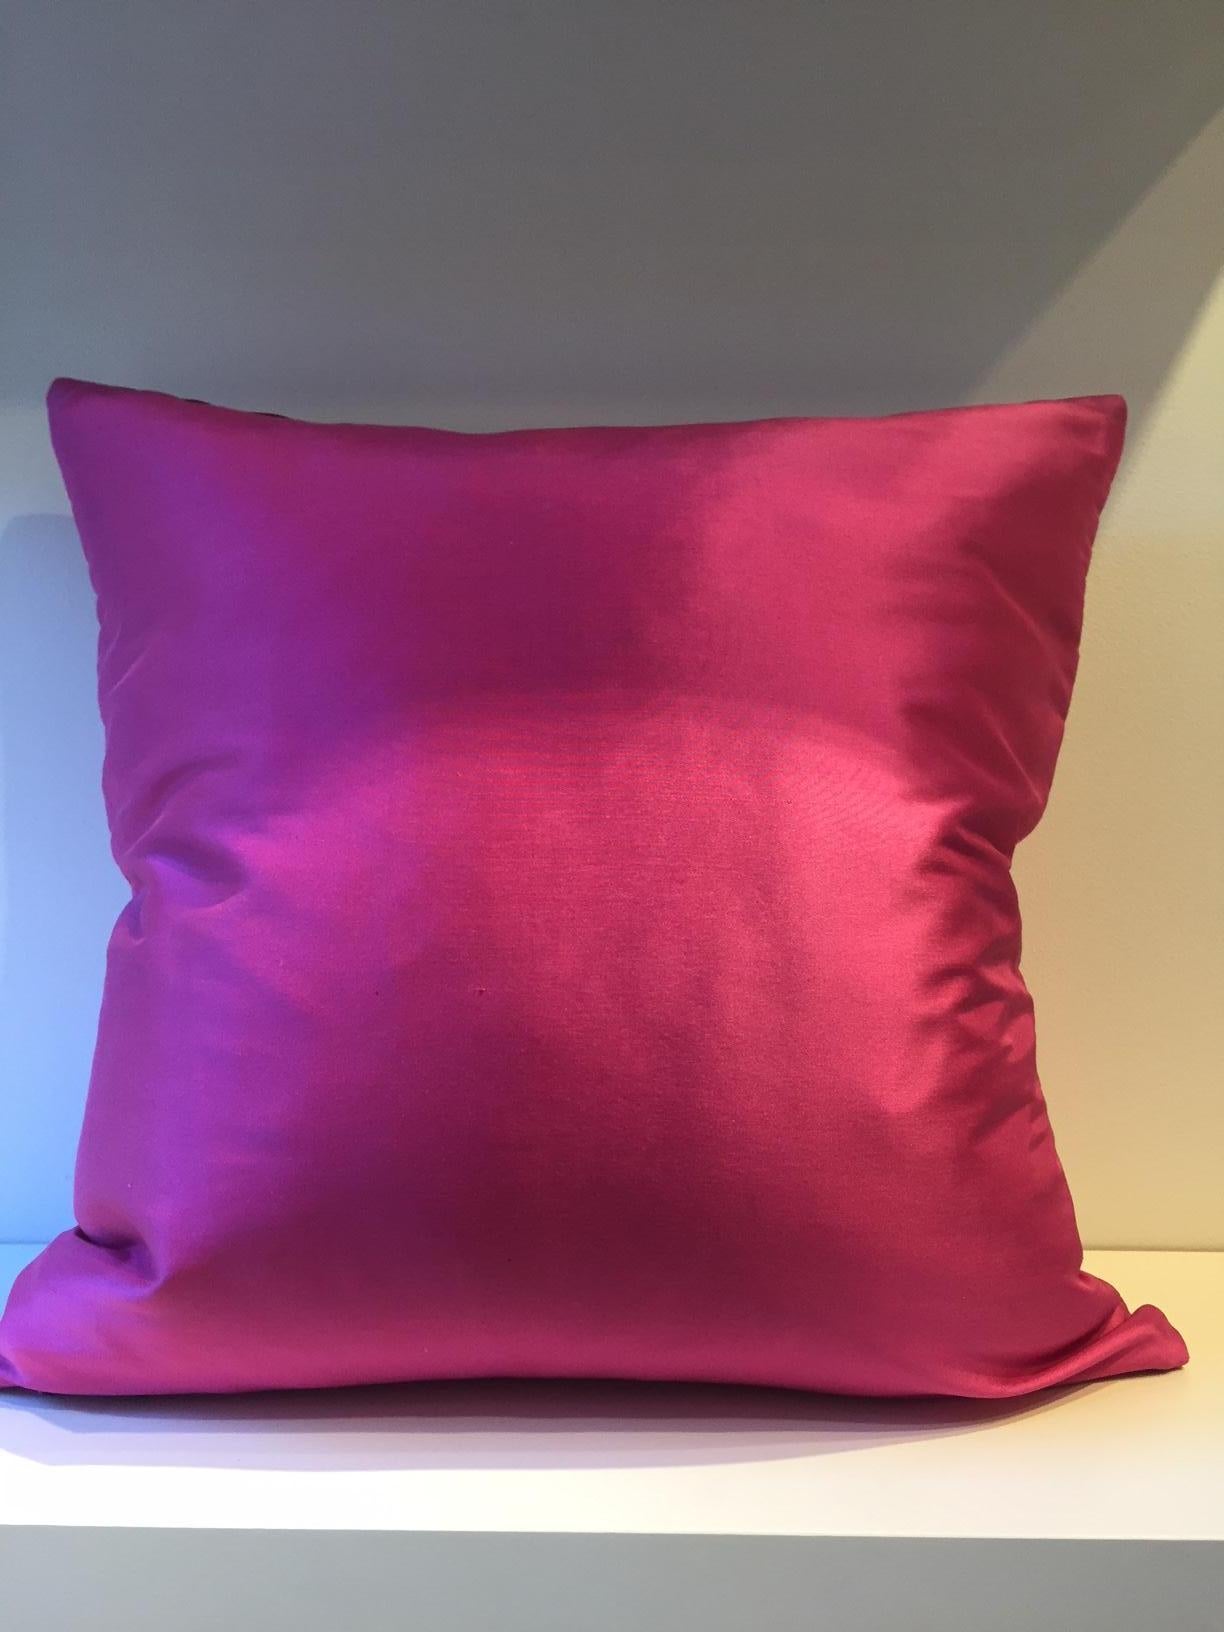 Decorative cushion: taffeta silk fabric, color lipstick pink with embossed front panel in steam pleated Box Pleat pattern, back panel plain silk taffeta, 50 x 50cm, concealed zipper in the bottom seam, cotton lining, feather inner pad,
1 no cushion